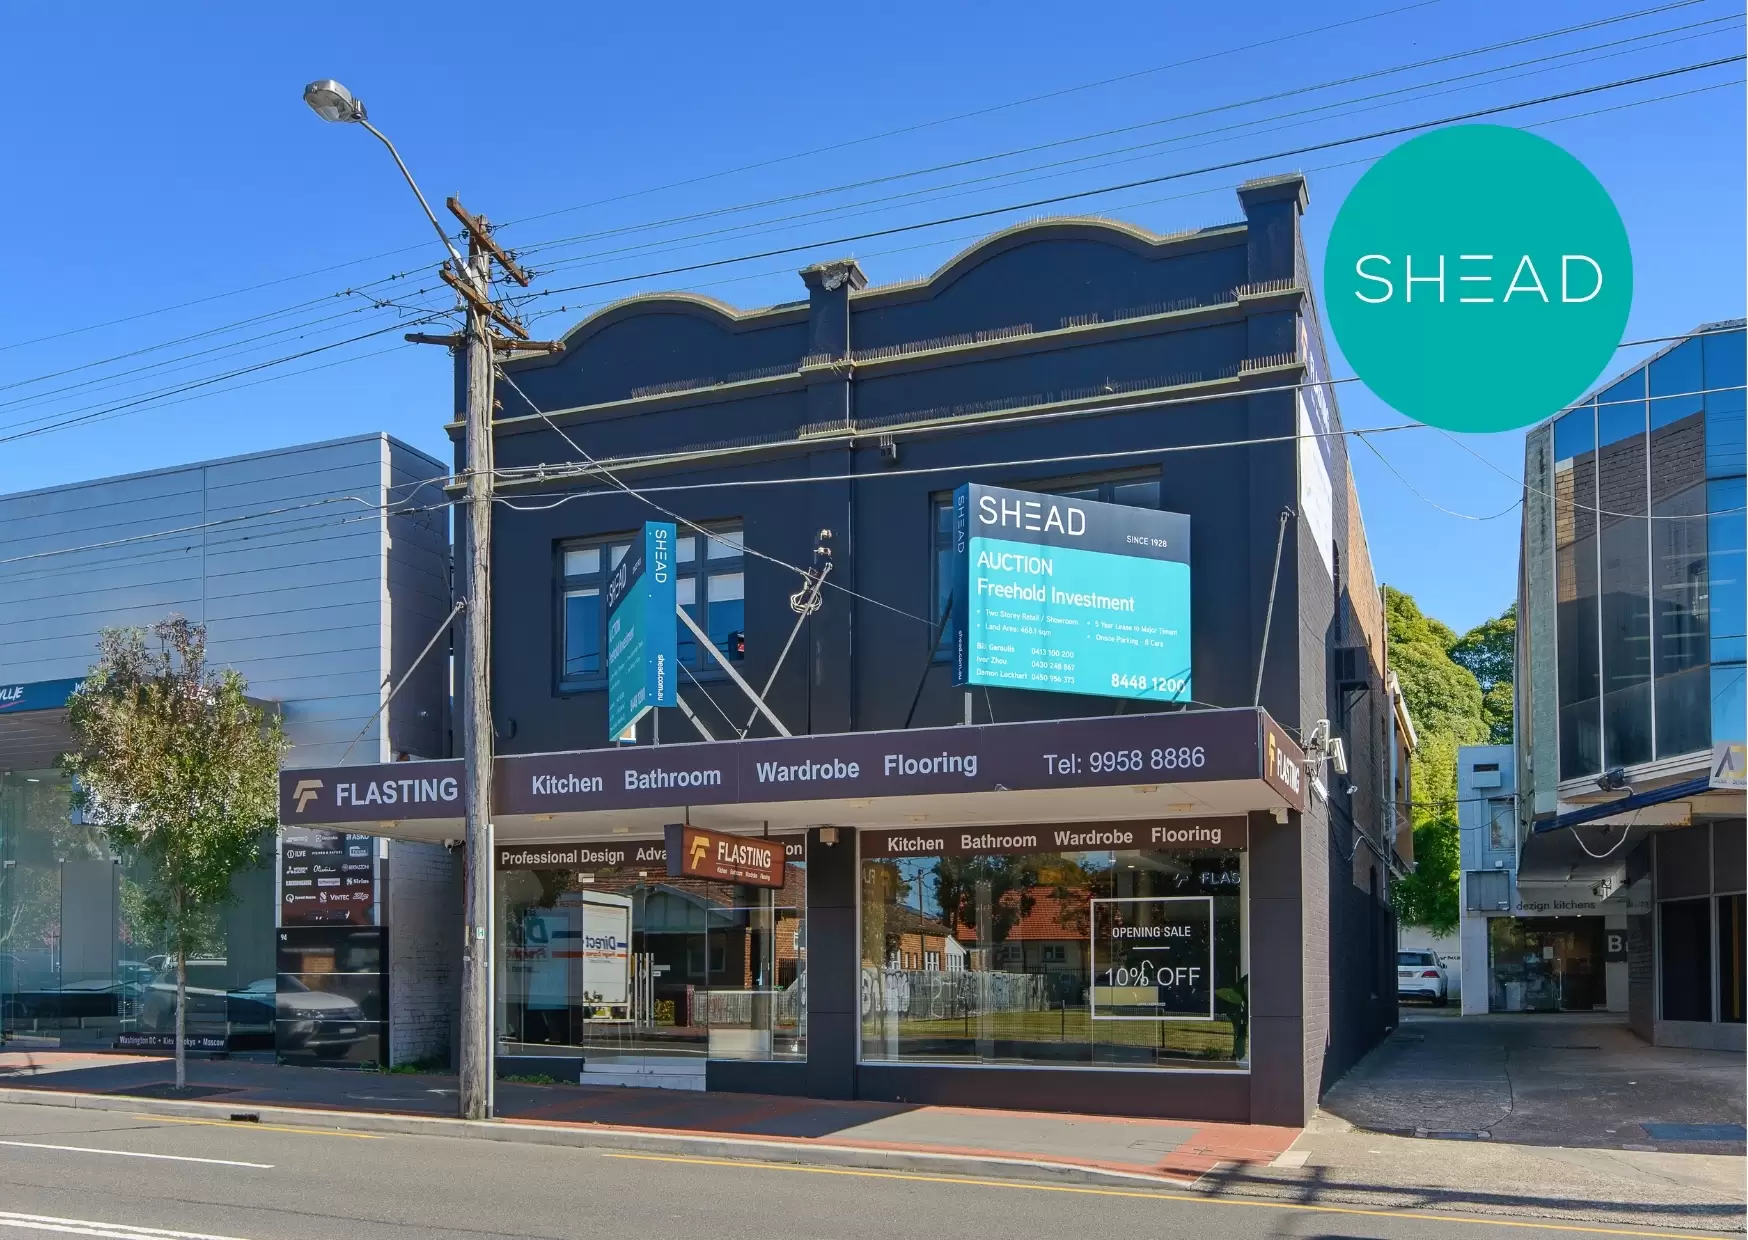 96-98 Penshurst Street, Willoughby Sold by Shead Property - image 1